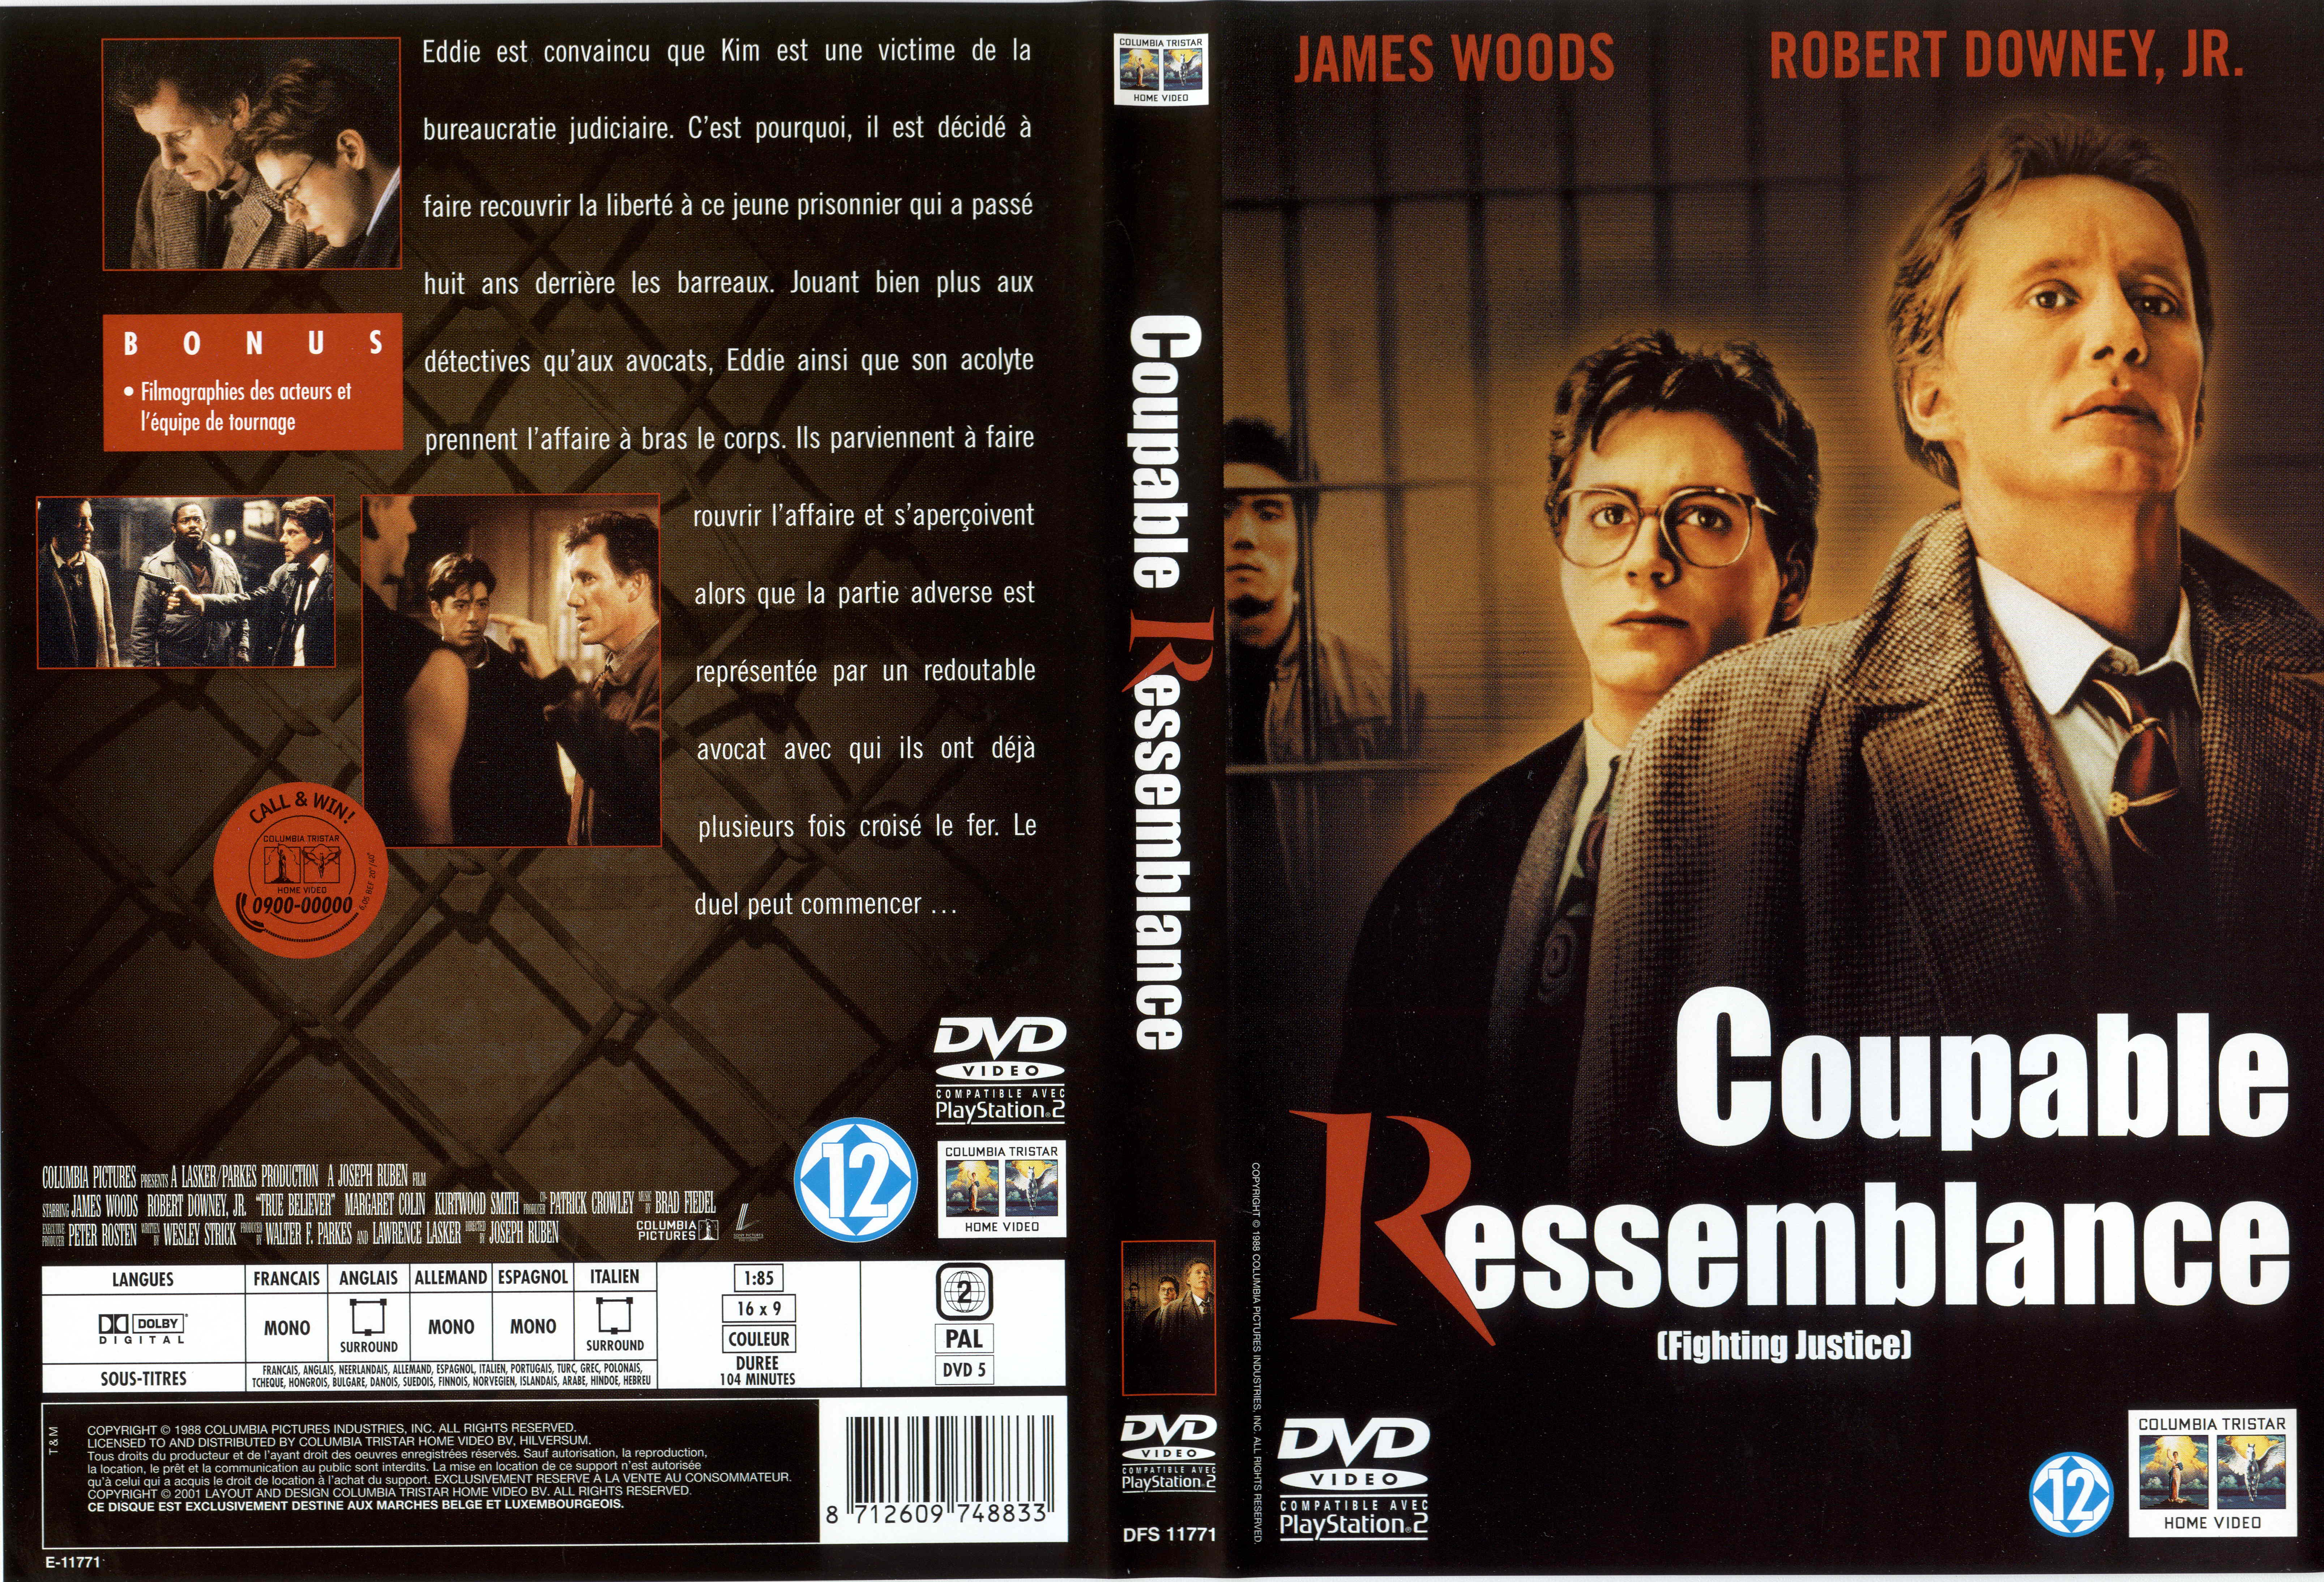 Jaquette DVD Coupable ressemblance